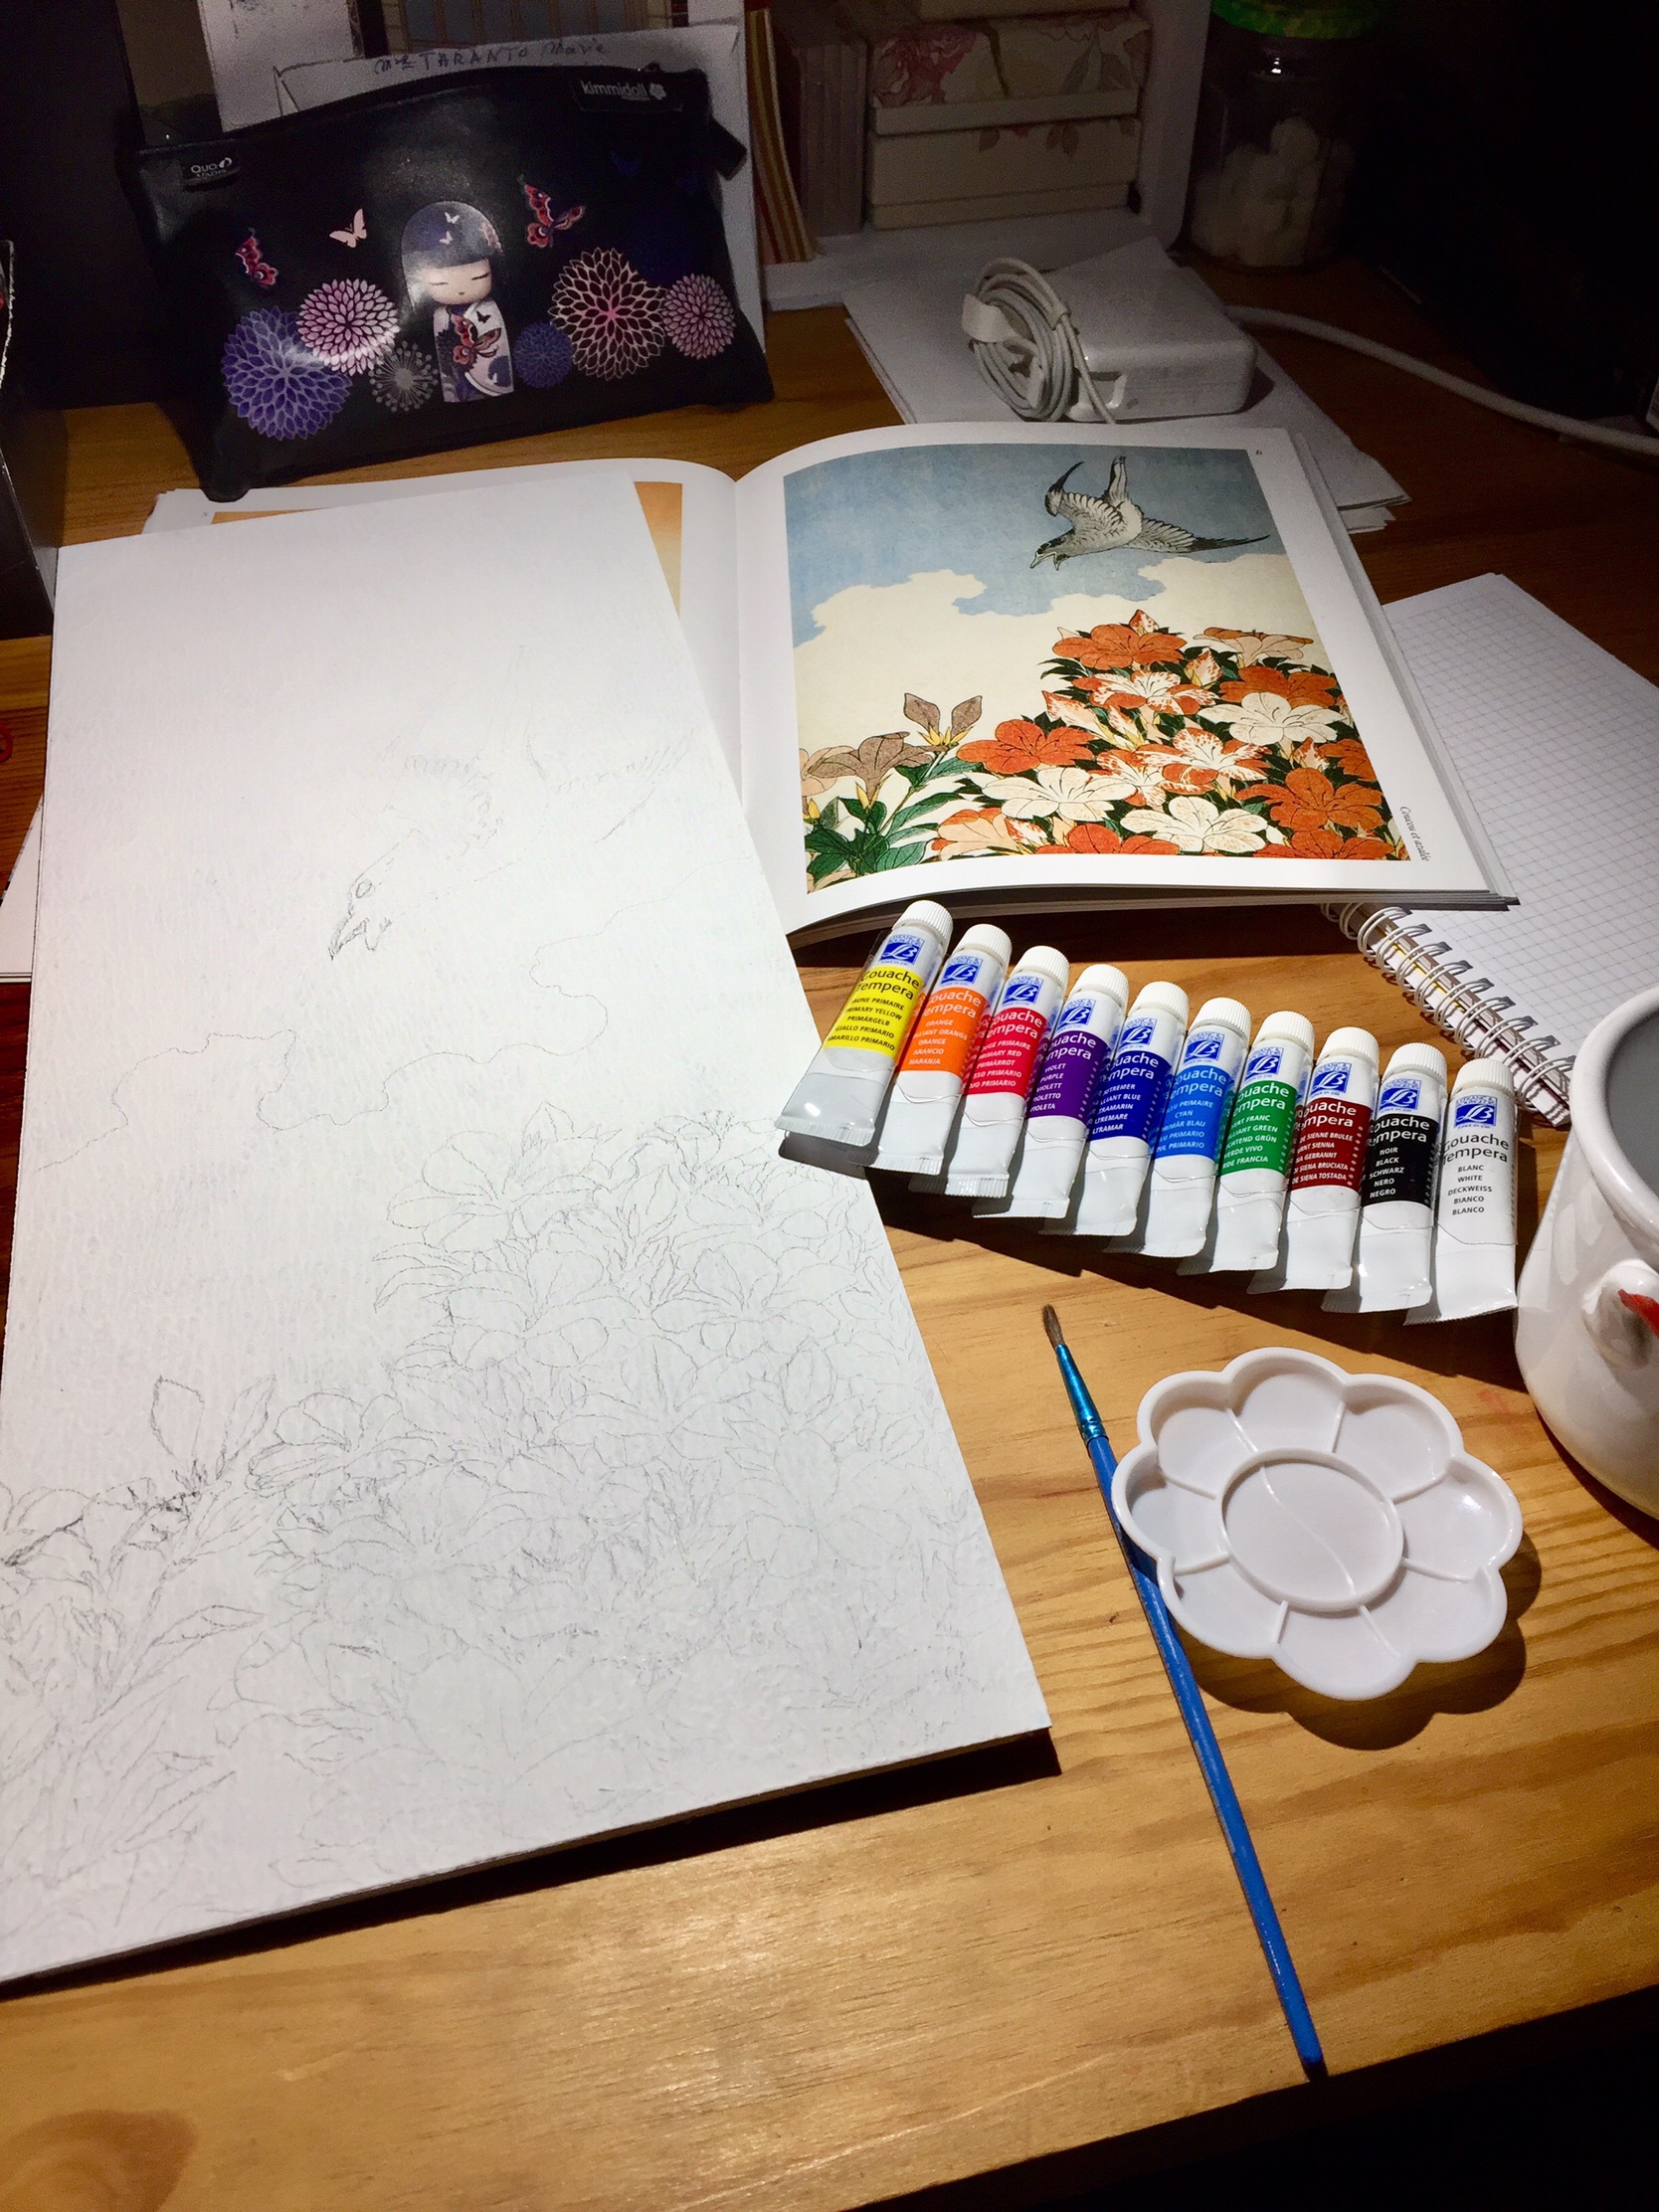 Large white wooden board on a table next to gouache paint tubes, a brush and tiny plastic palette. A book is open at the illustration that I use as reference. A precise pencil sketch is visible on the board.